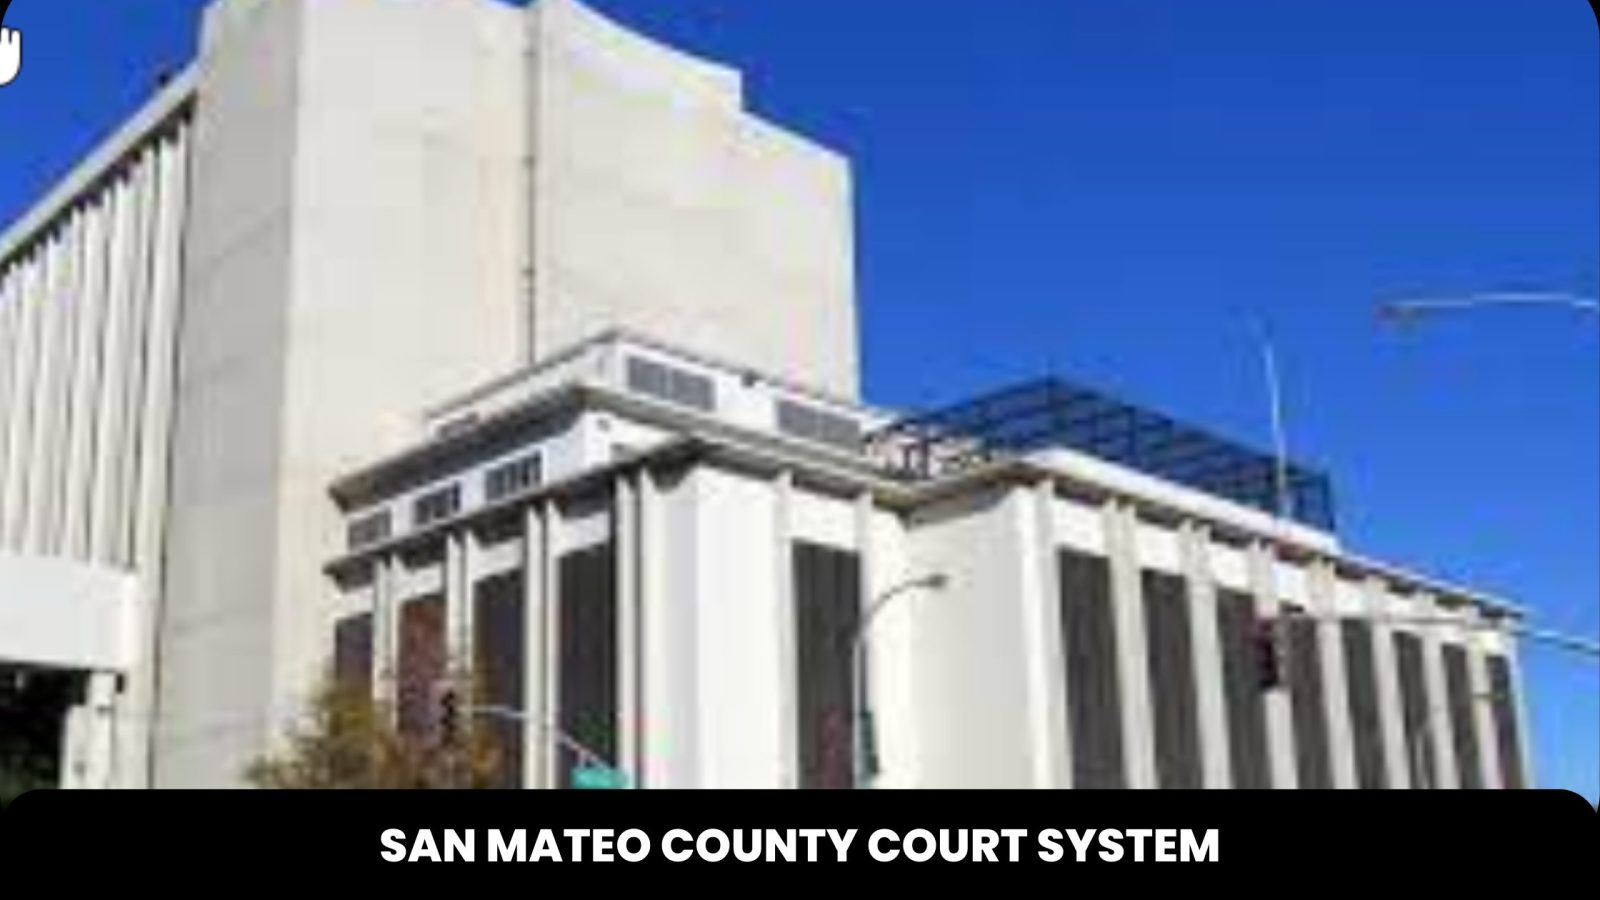 San Mateo County Court System